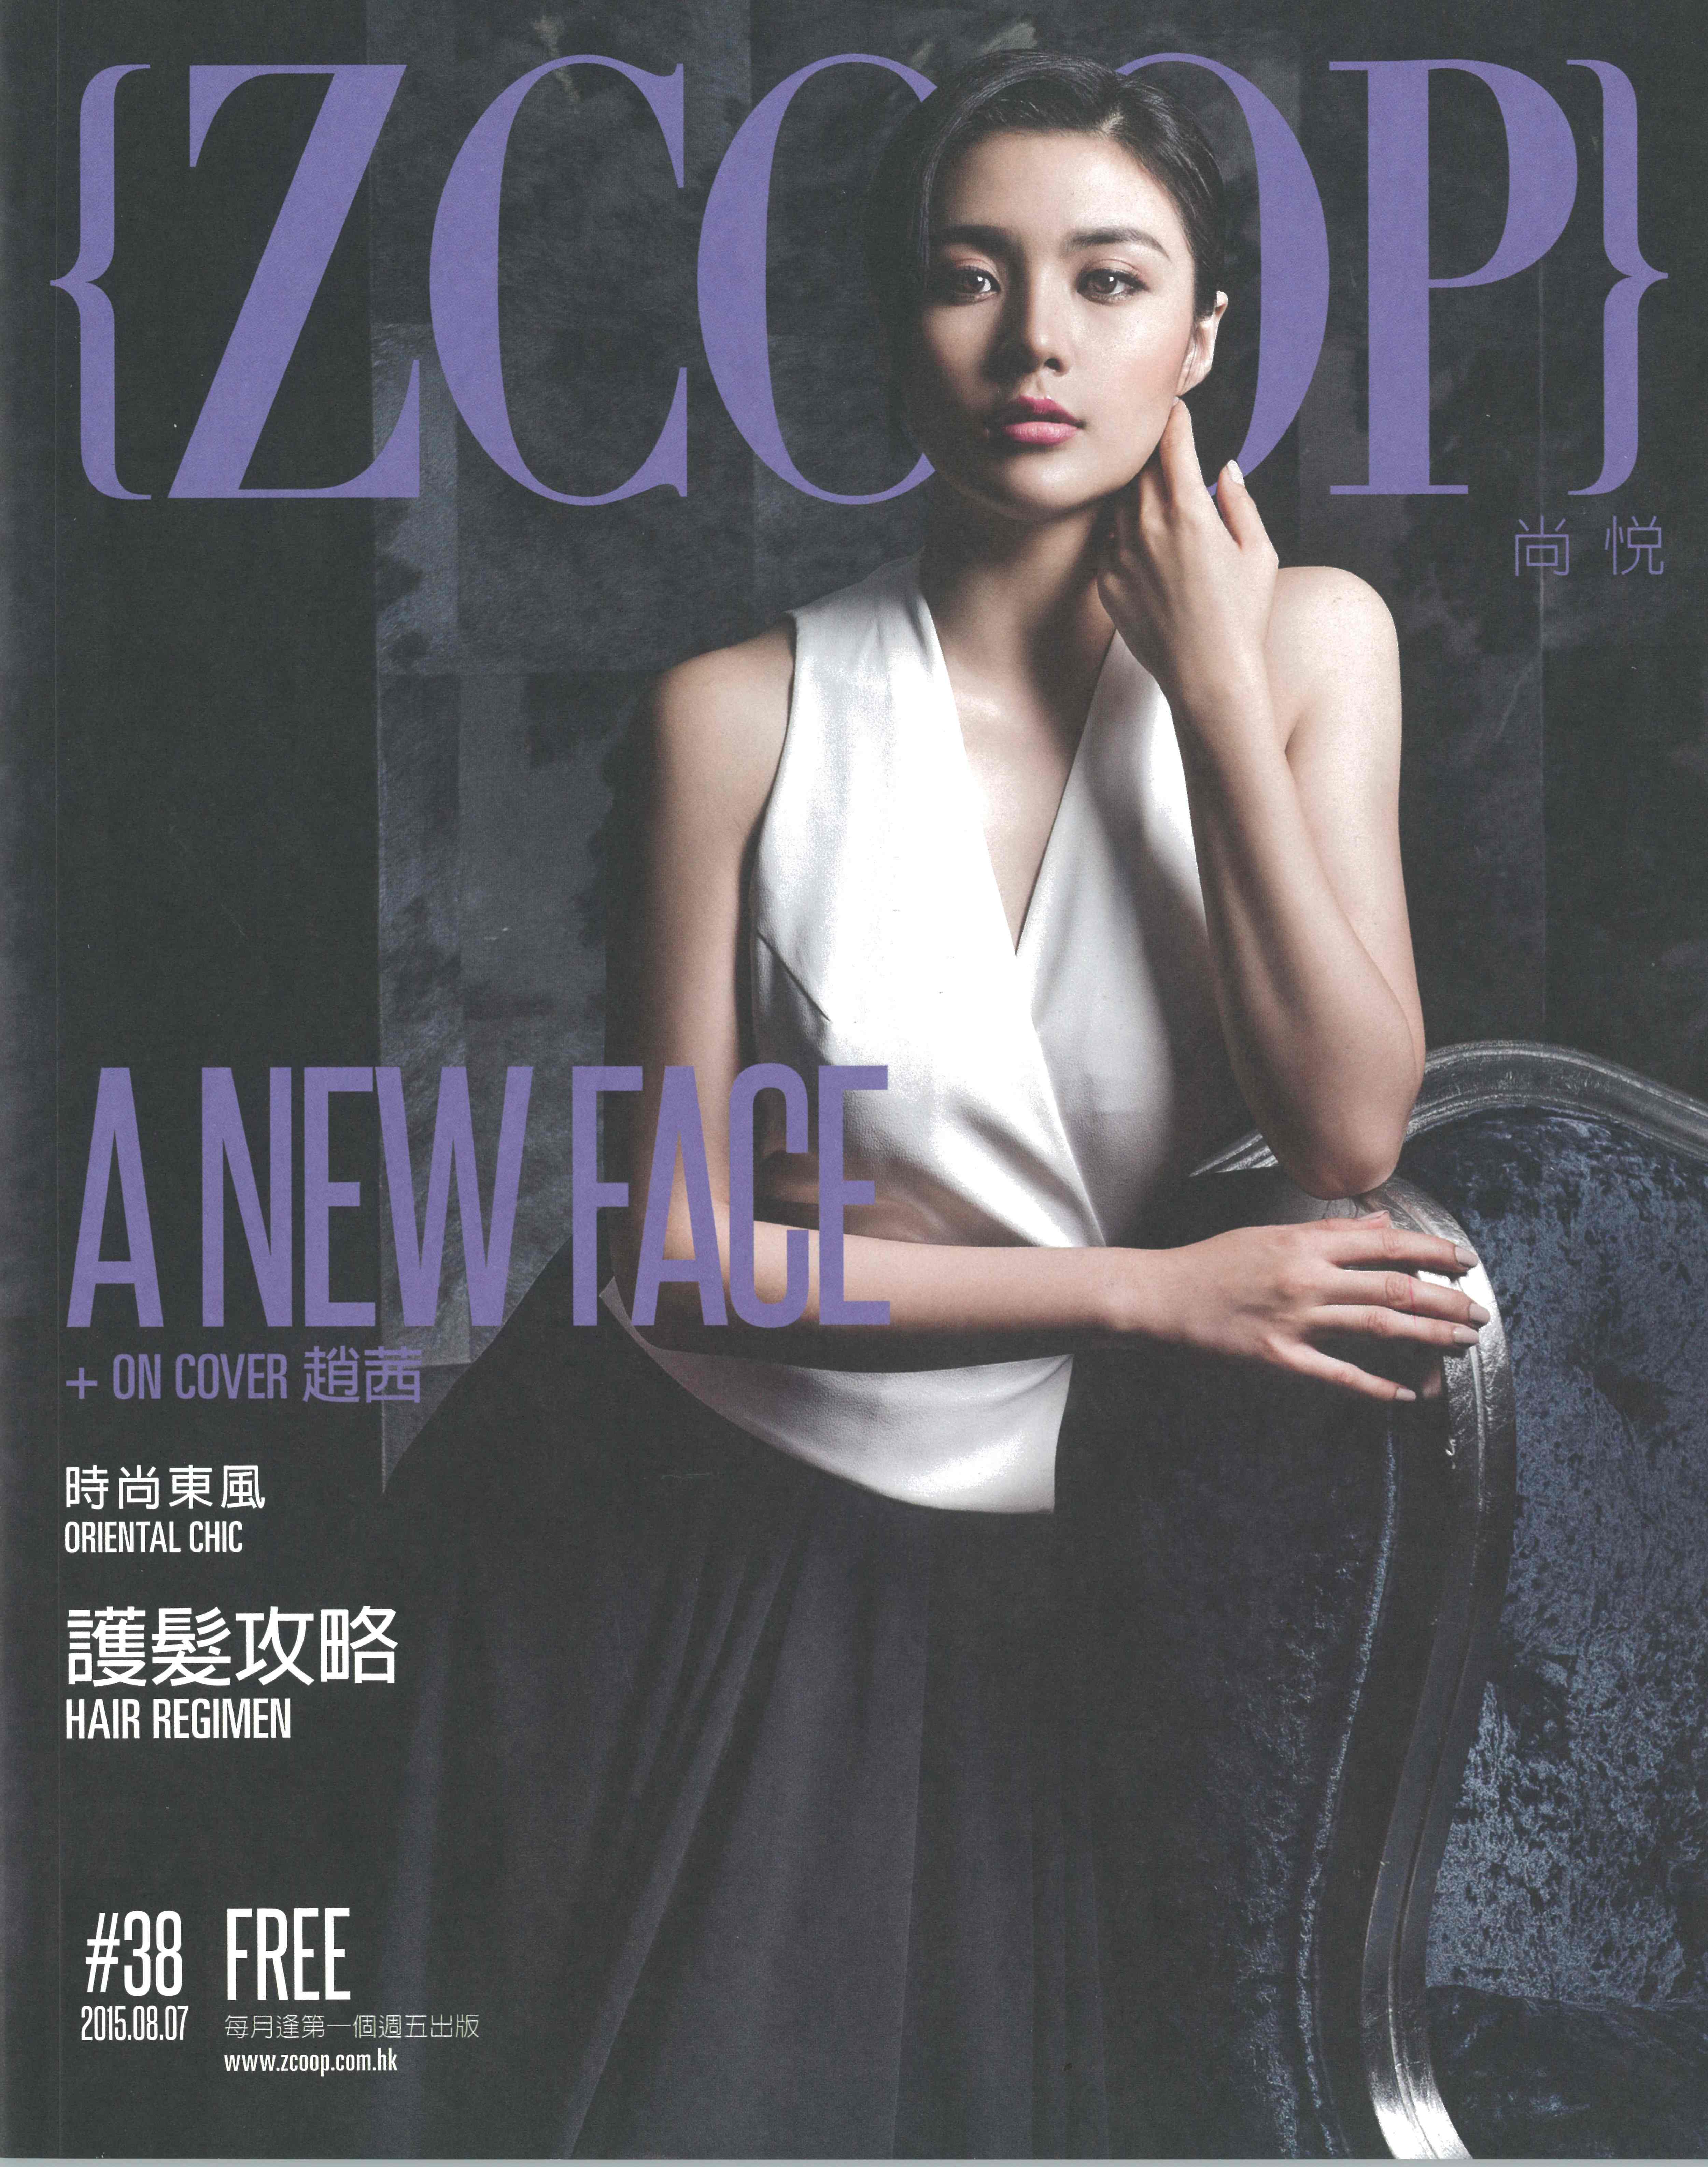 Candice on Cover of ZCCOP August 2015